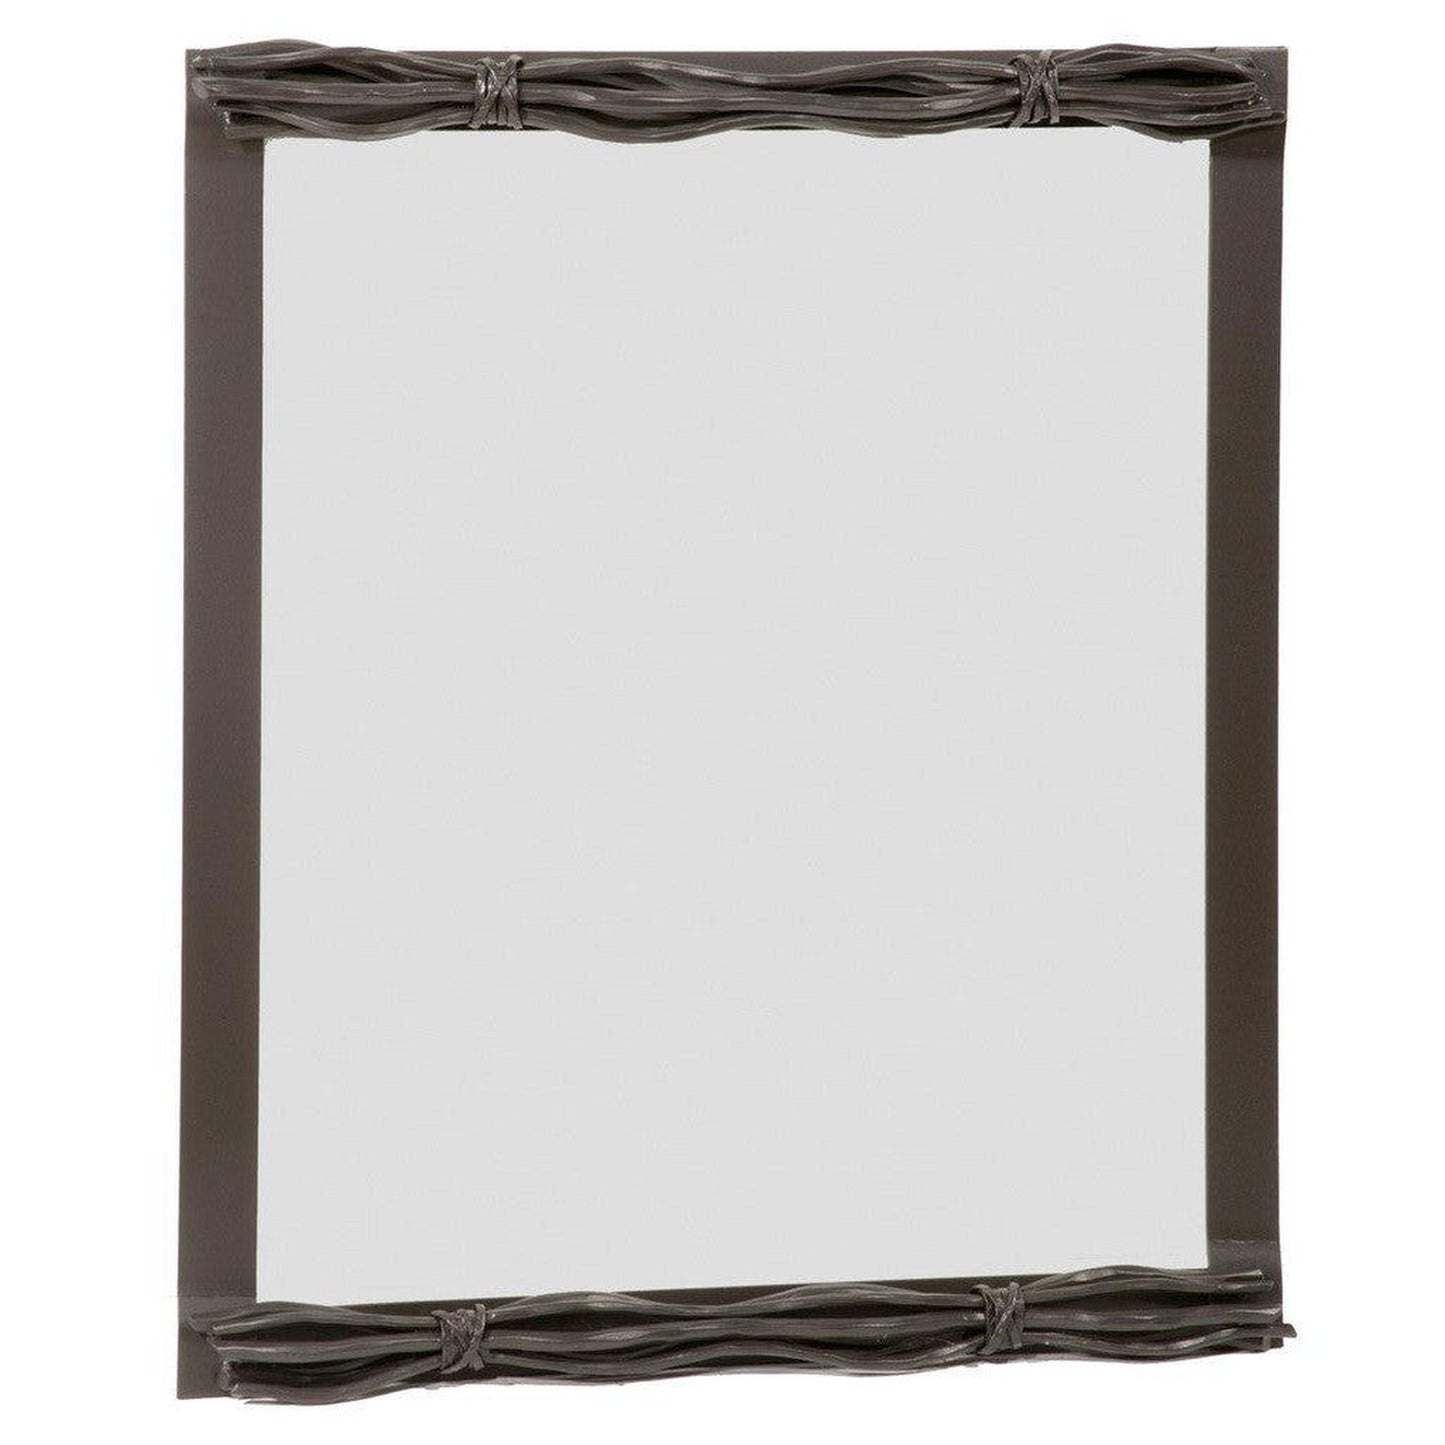 Stone County Ironworks Rush 26" x 38" Large Satin Black Iron Wall Mirror With Pewter Iron Accent